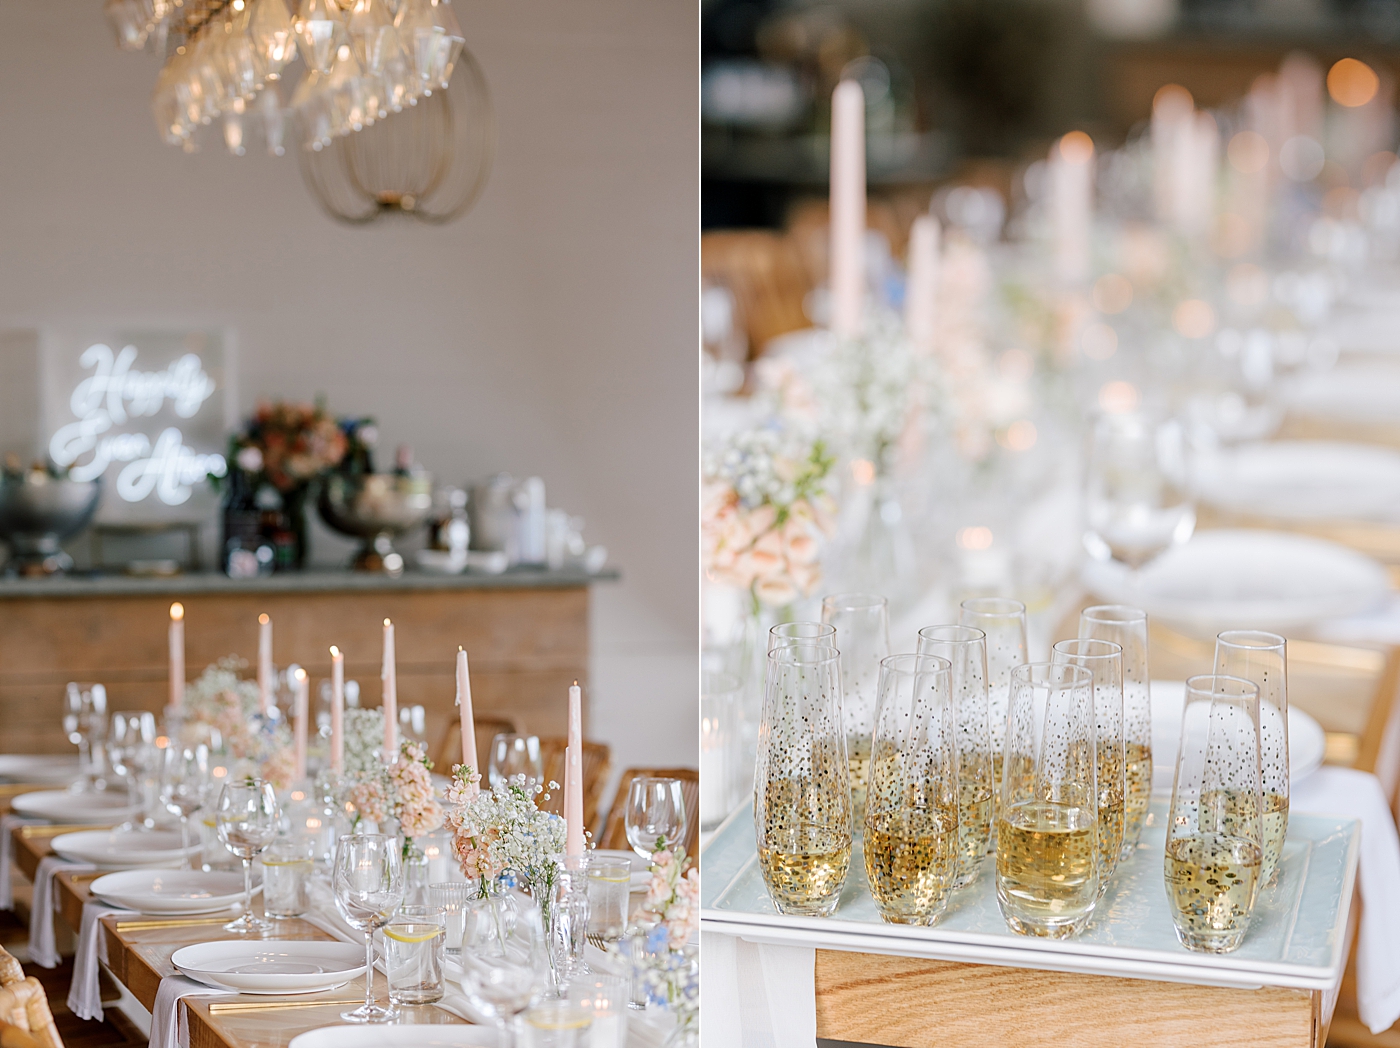 Reception table with pink candles and gold champagne glasses | Image by Hope Helmuth Photography 